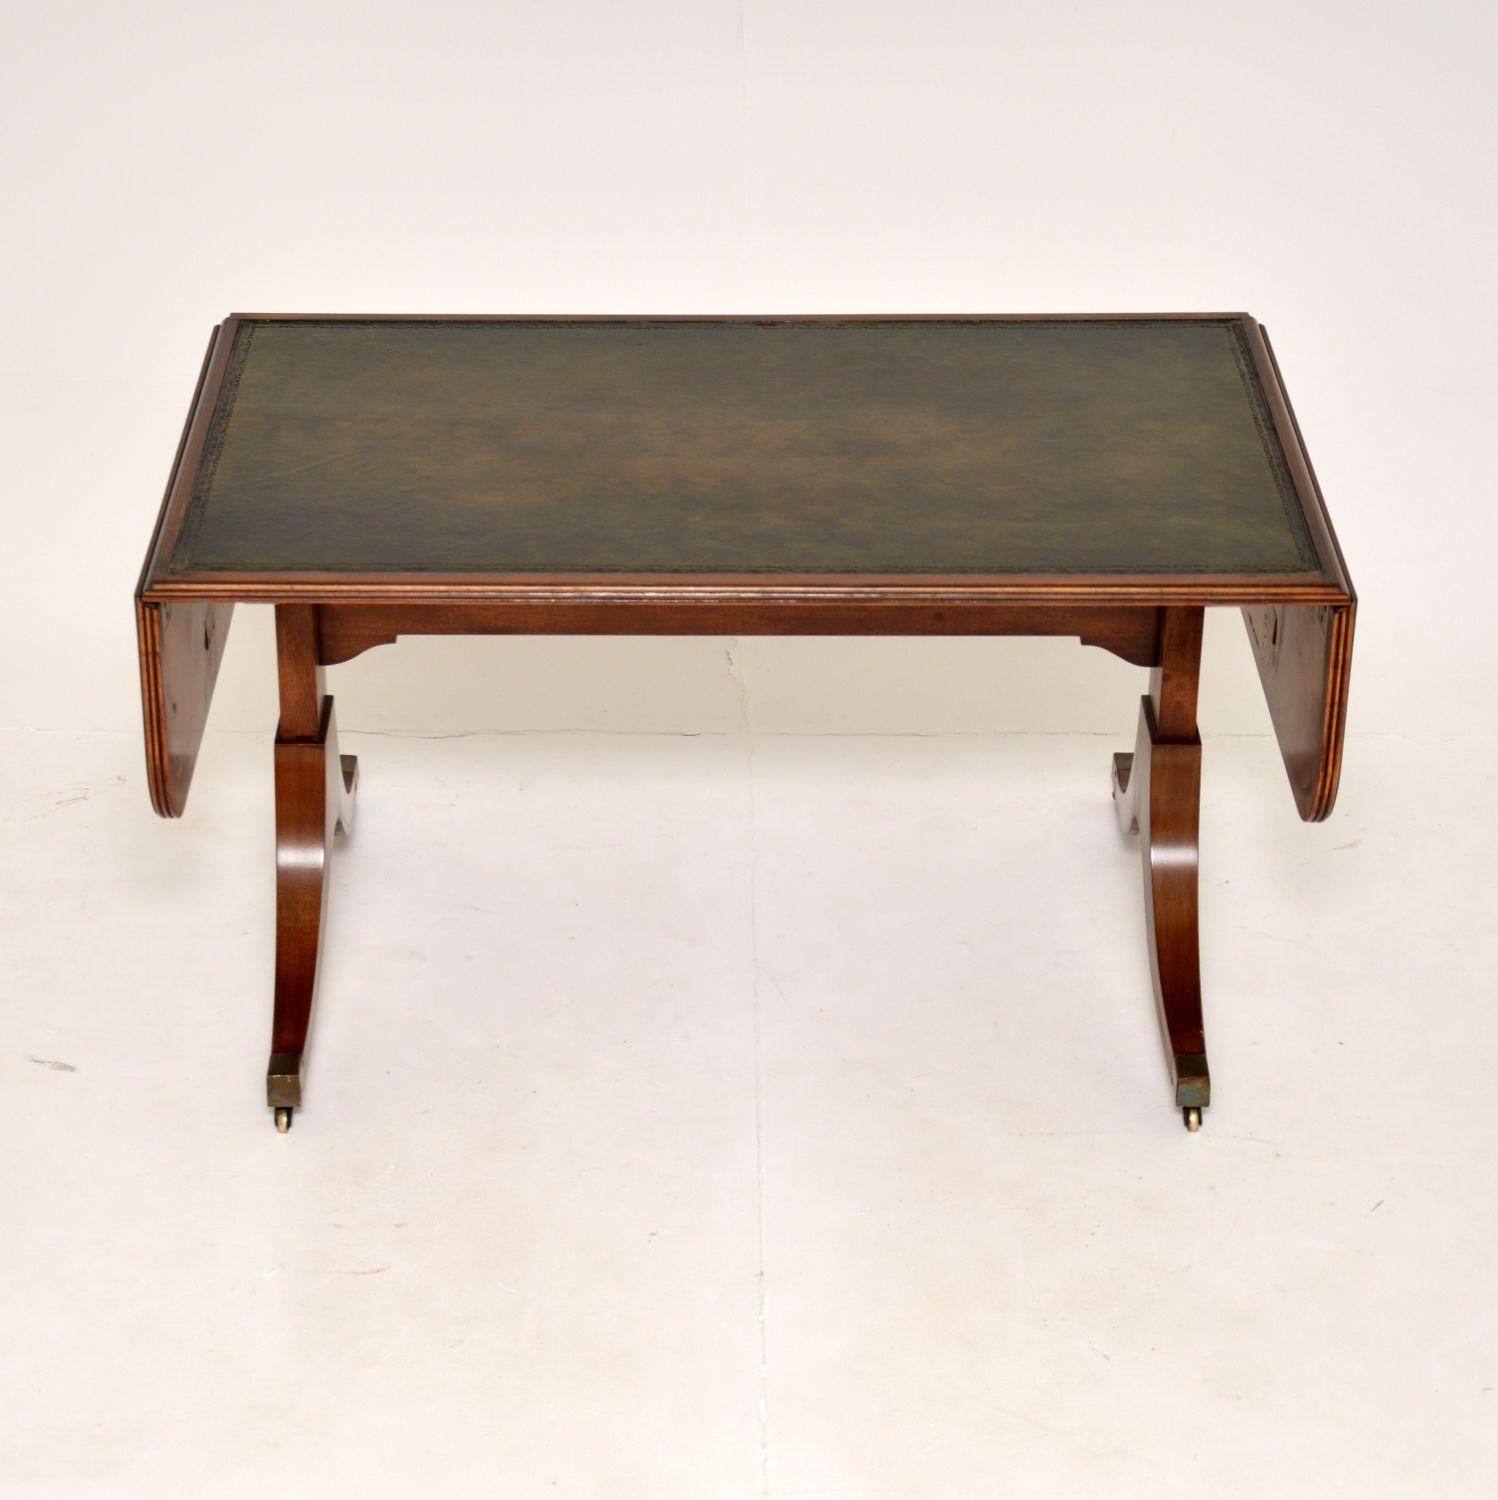 A lovely antique Regency style drop leaf coffee table. This was made in England, it dates from around the 1930’s.

It has a stylish and useful design, the drop down ends lift up and are supported with pull out rails to increase the surface area